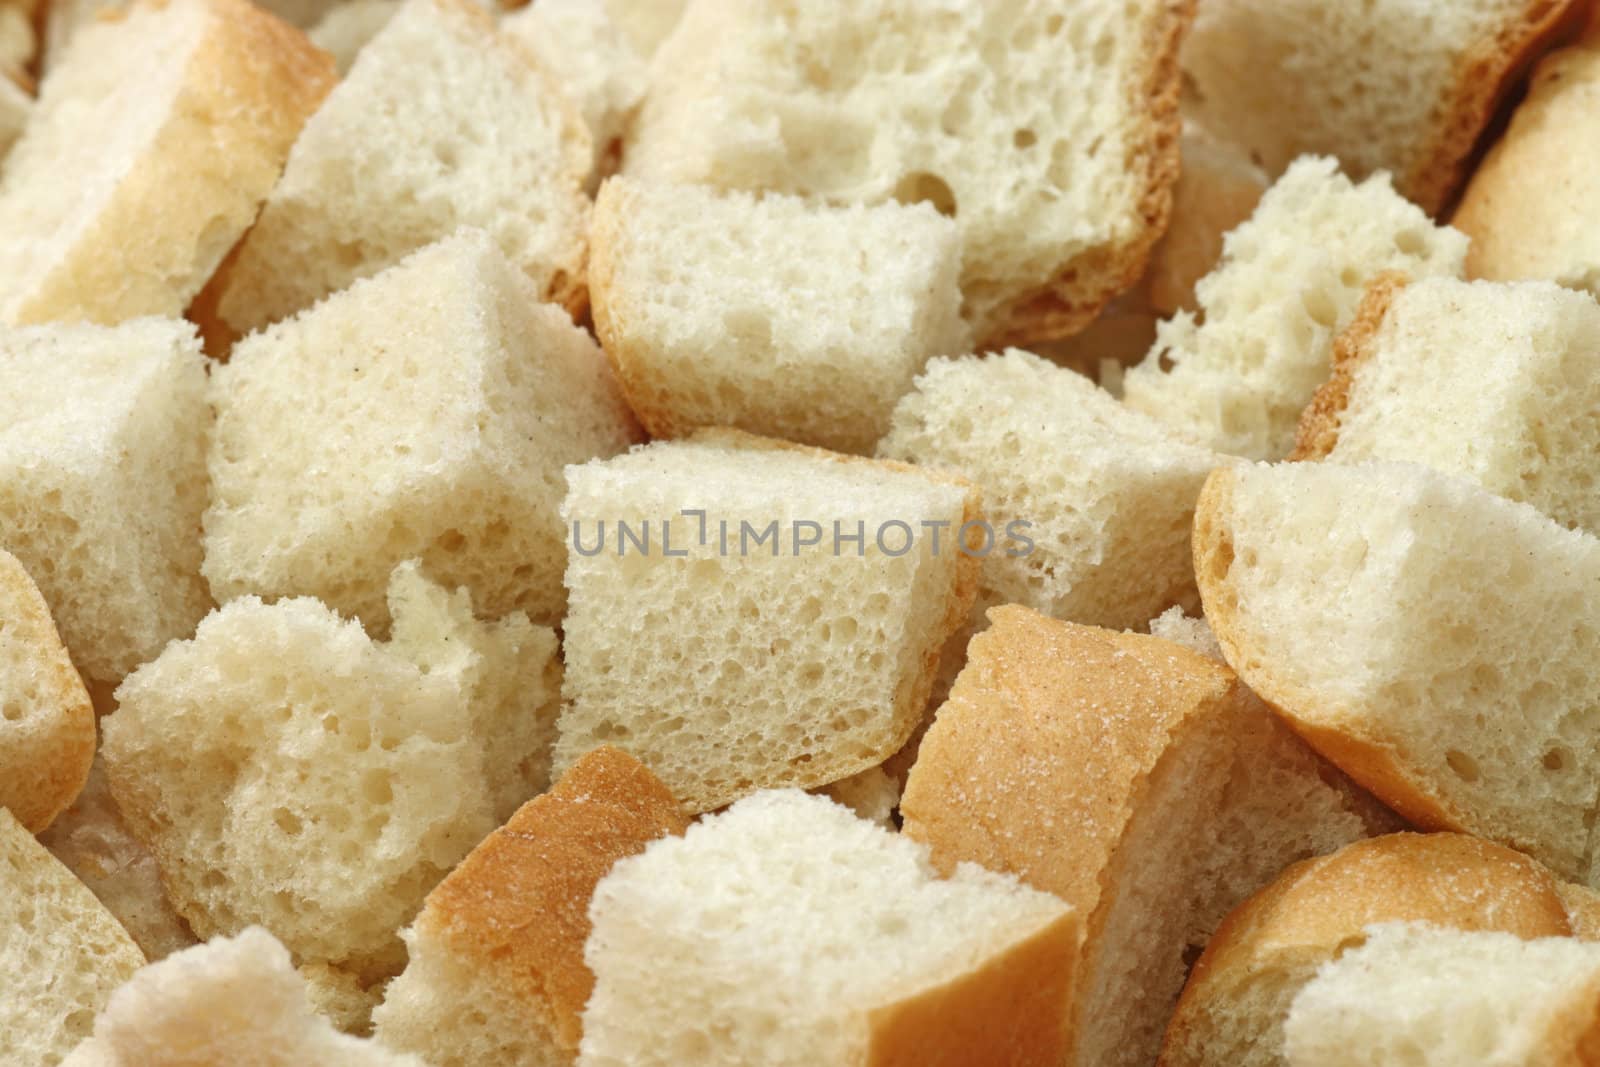 Heap of chopped white bread in close up